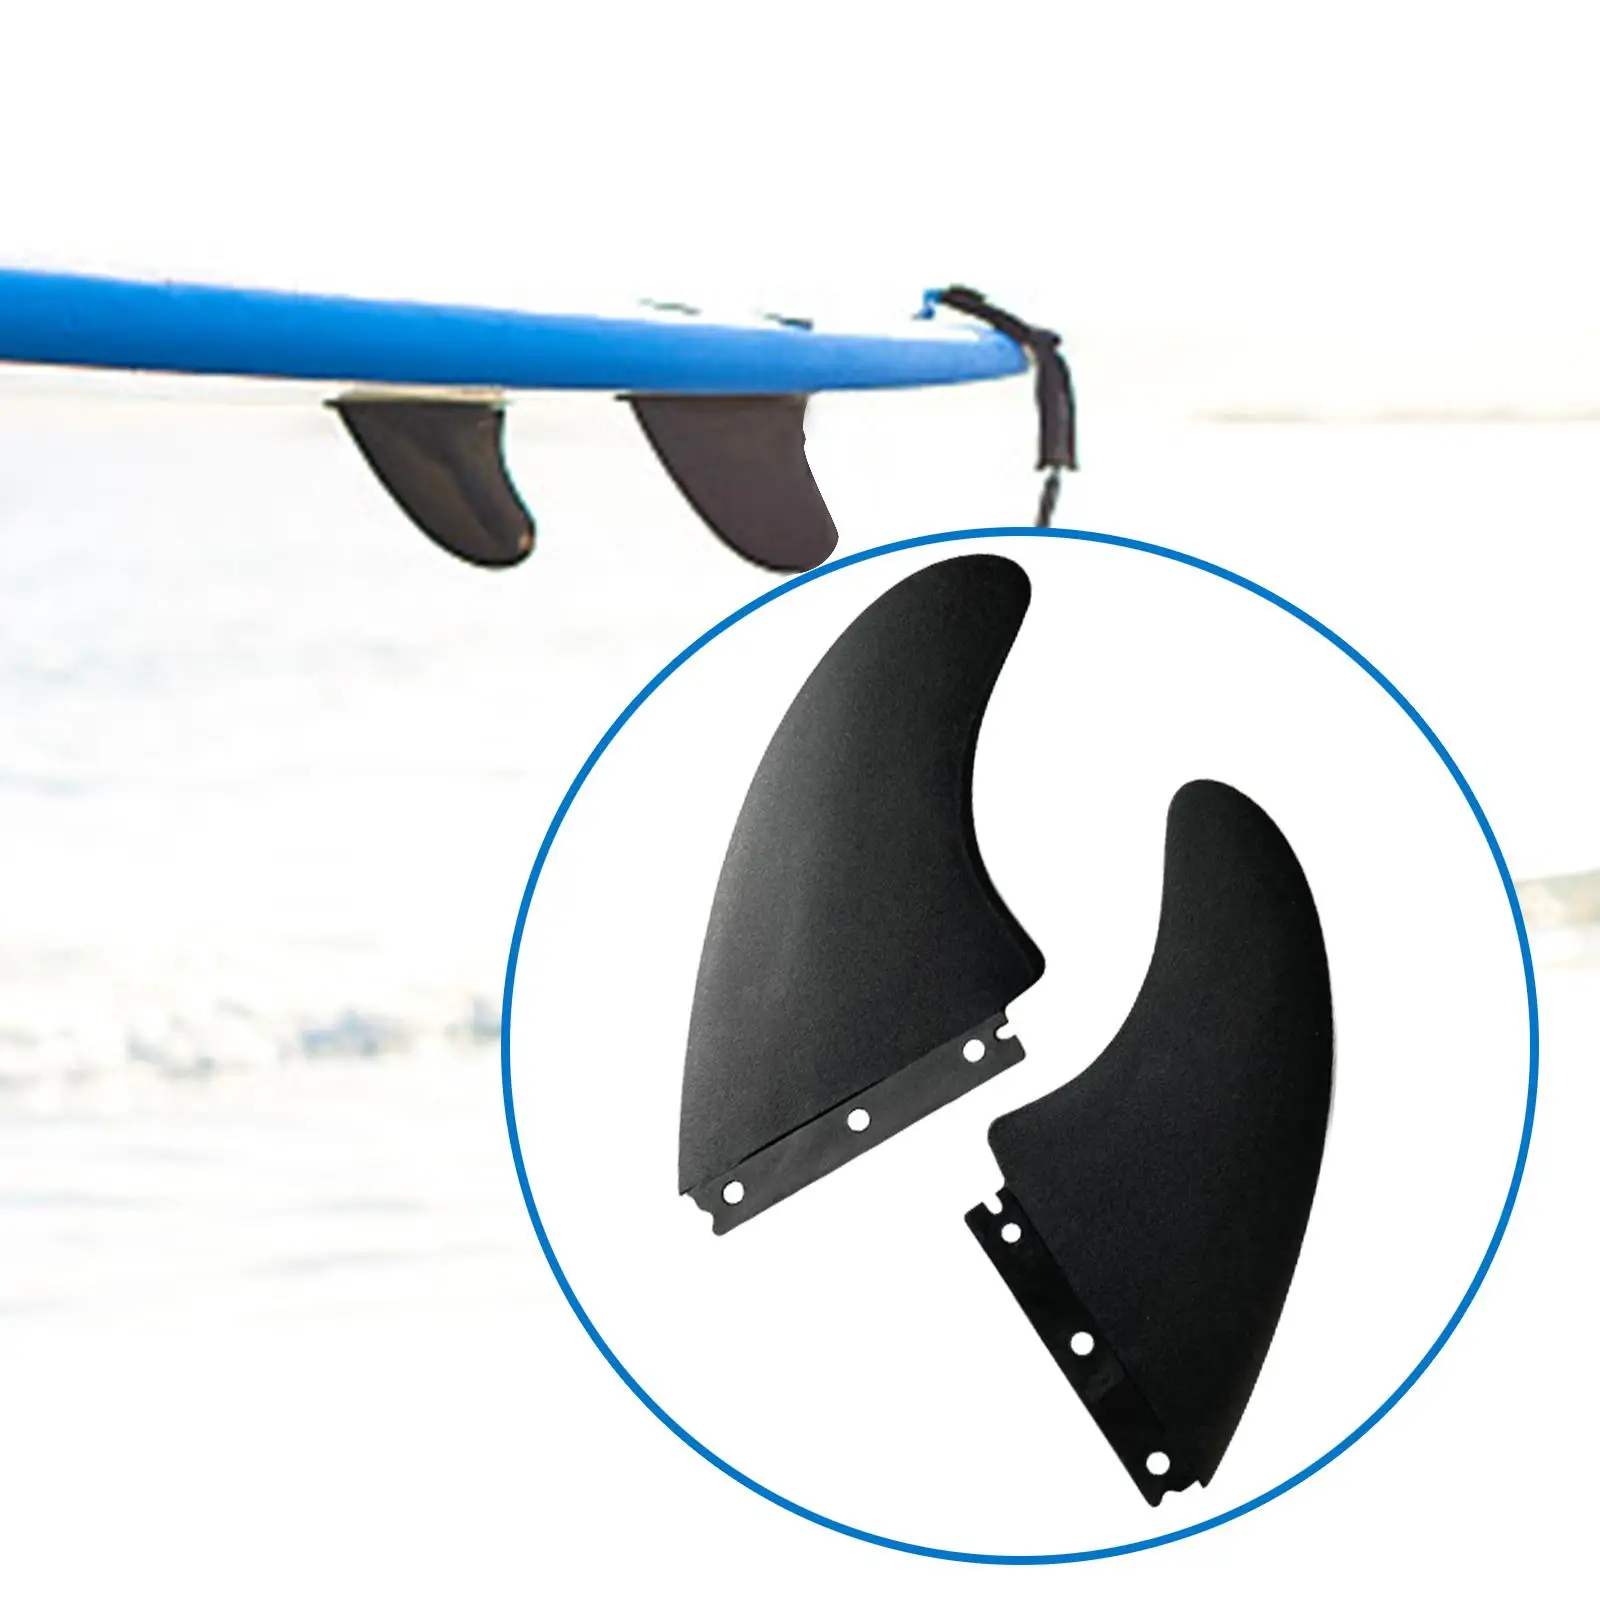 2Pcs Surfboard Fins Surf Board Tail Rudder Replacement Quick Release Surfing Surf for Water Sports Canoe Stand up Paddleboard